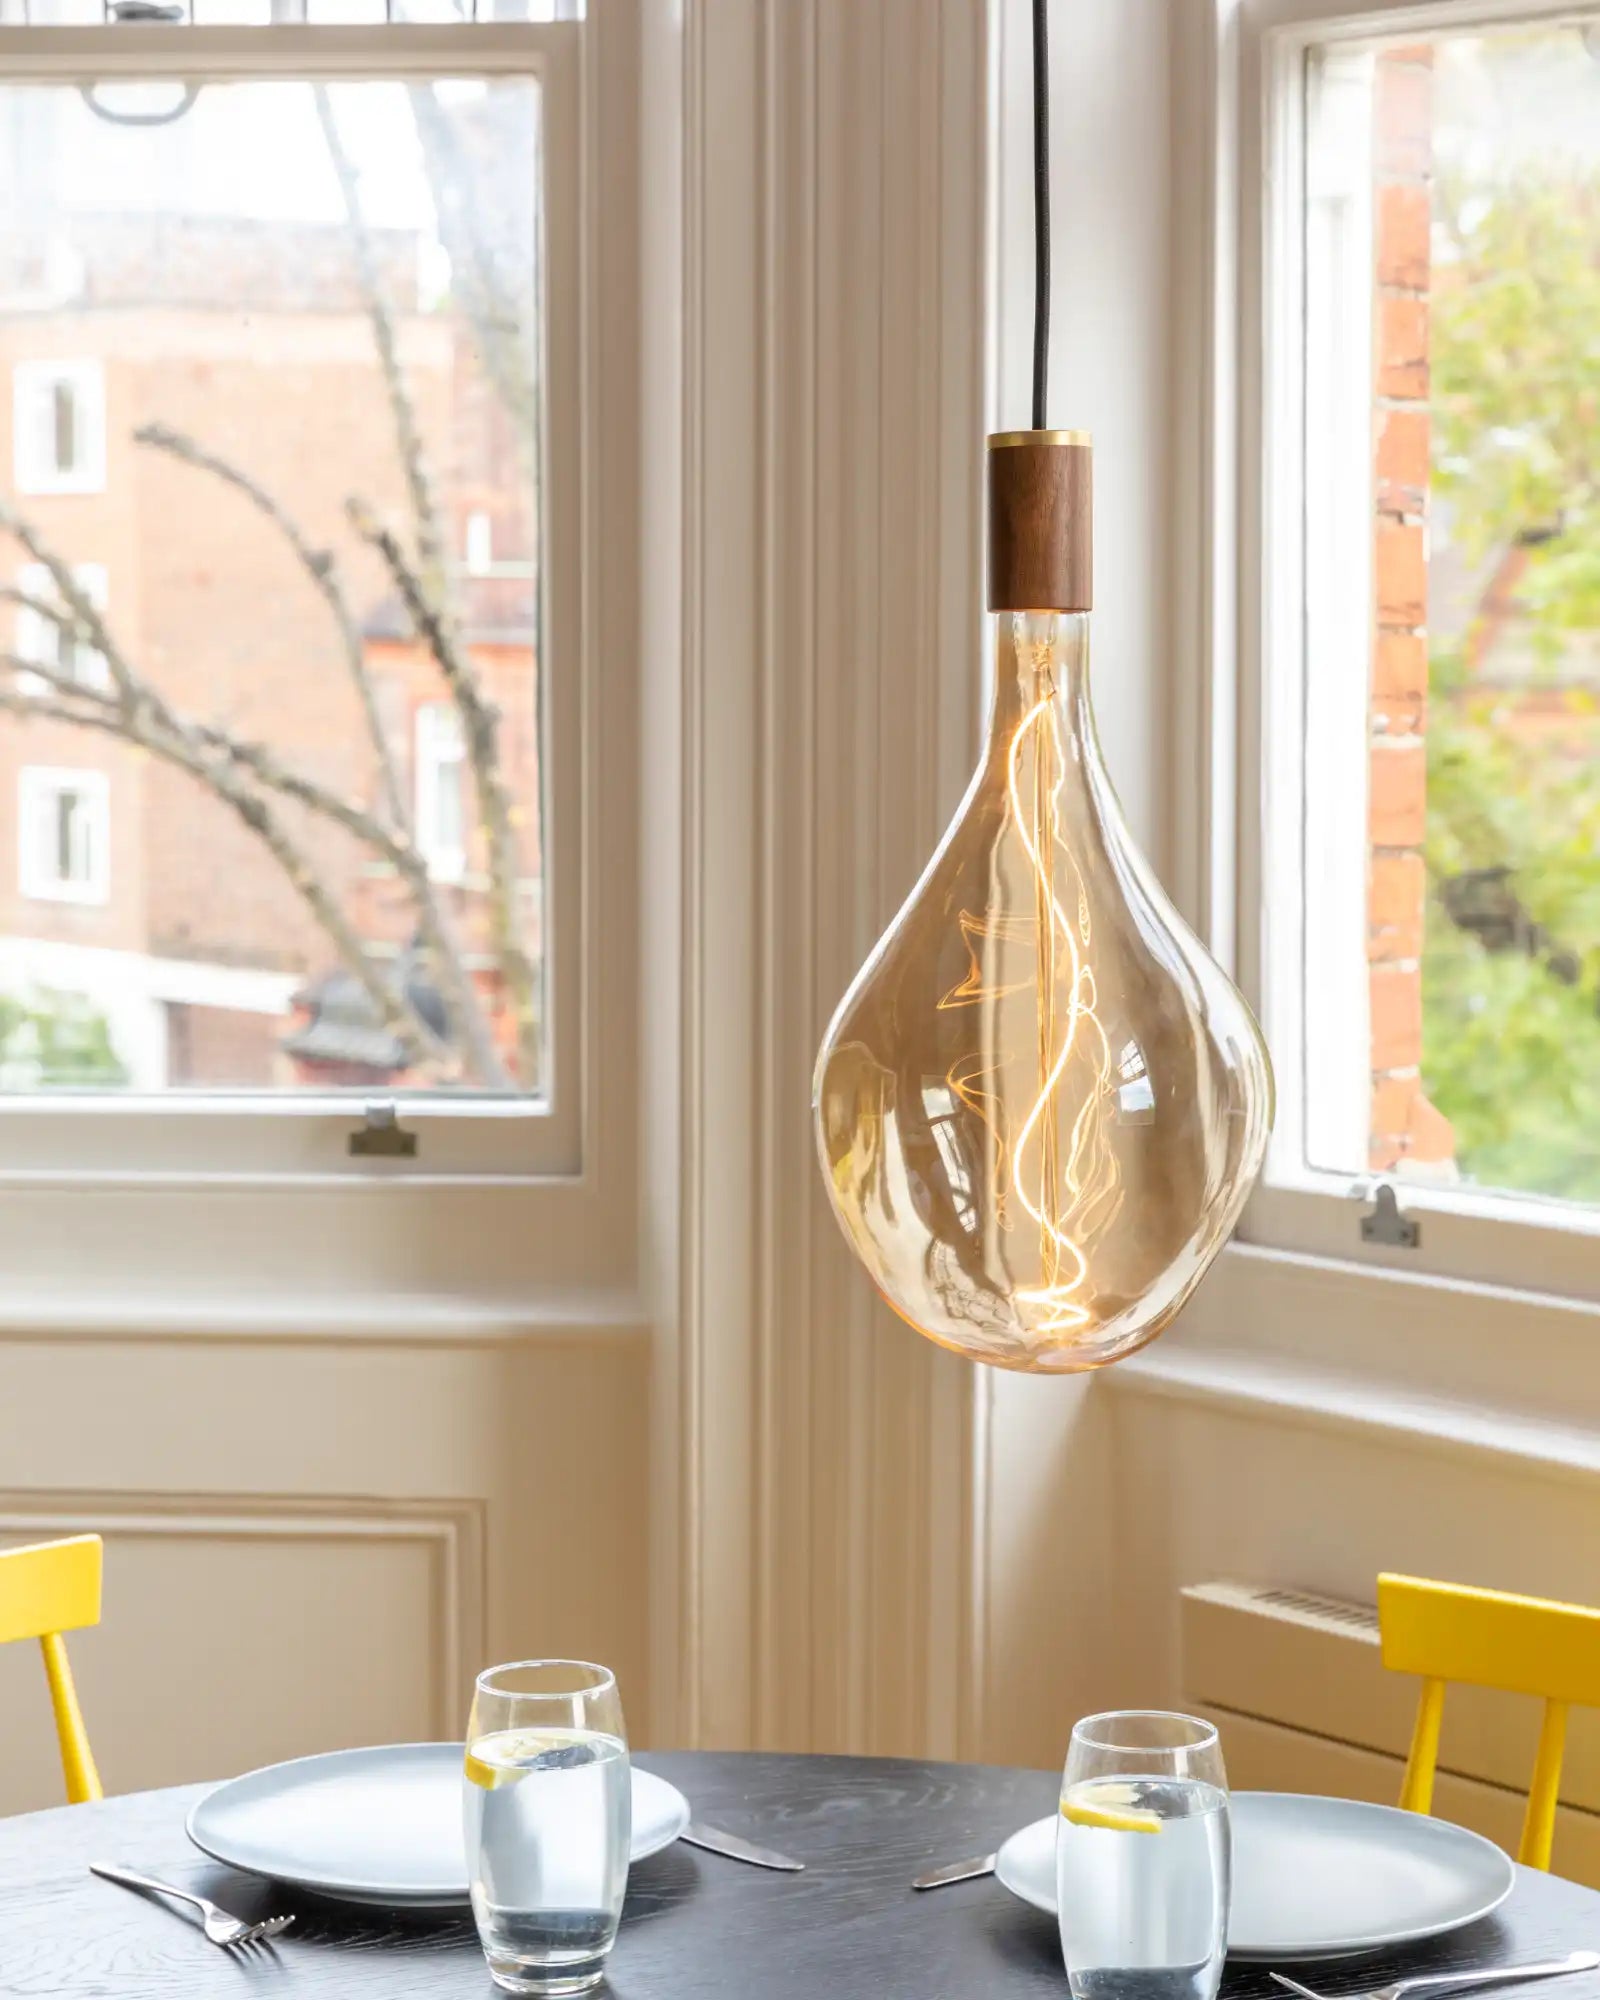 Voronoi Pendant Light by Tala featured within a contemporary dining room | Nook Collections